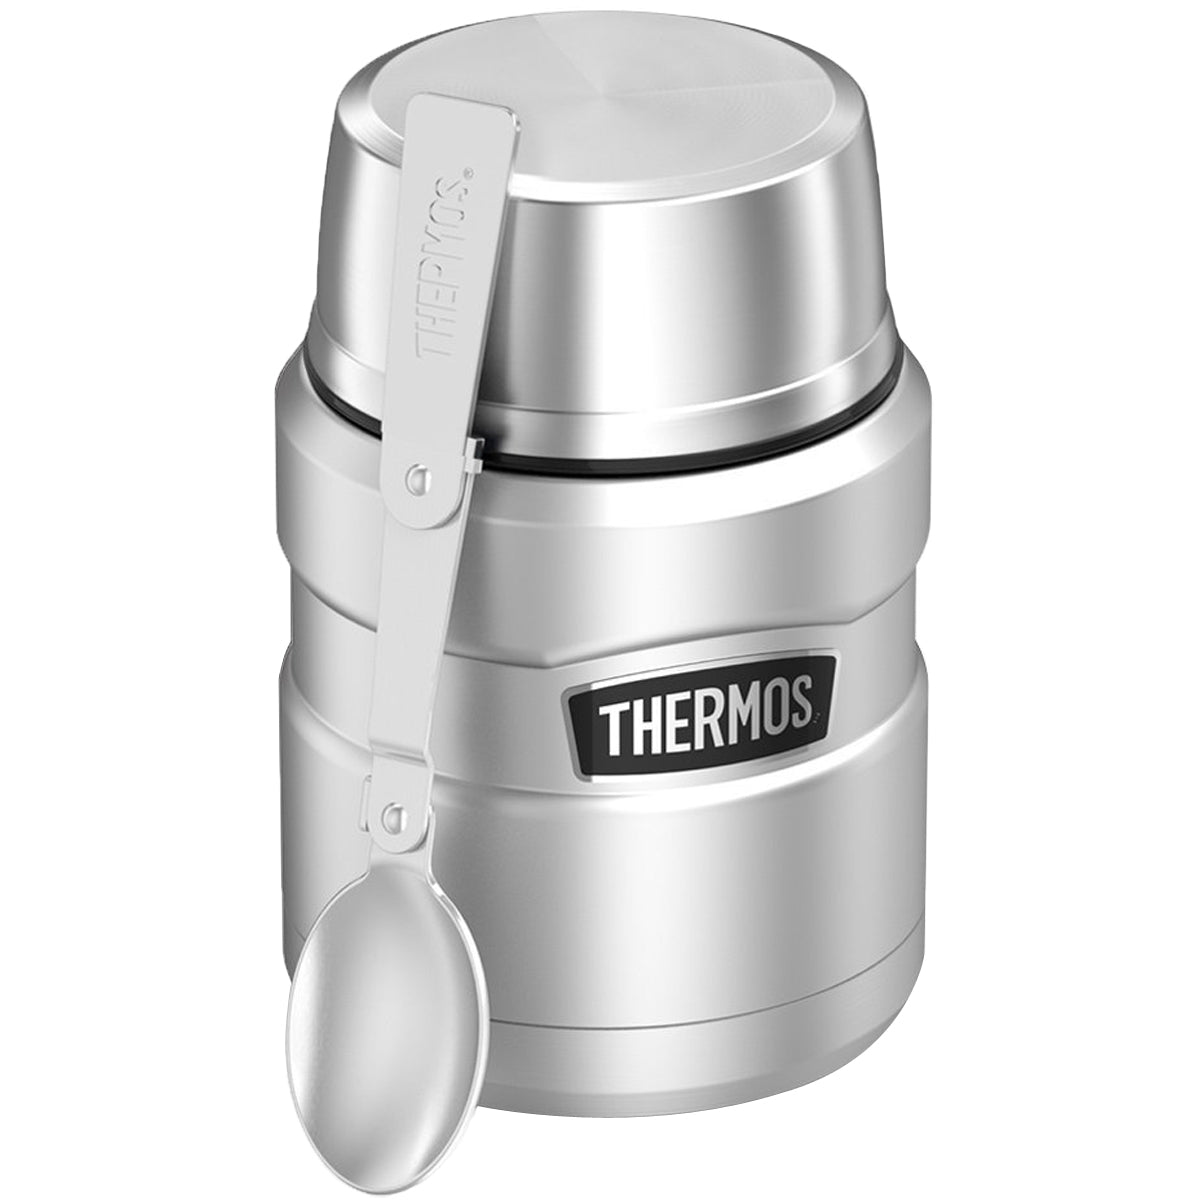 Thermos 16 oz Stainless King Vacuum Insulated Stainless Steel Food Jar Container Thermos